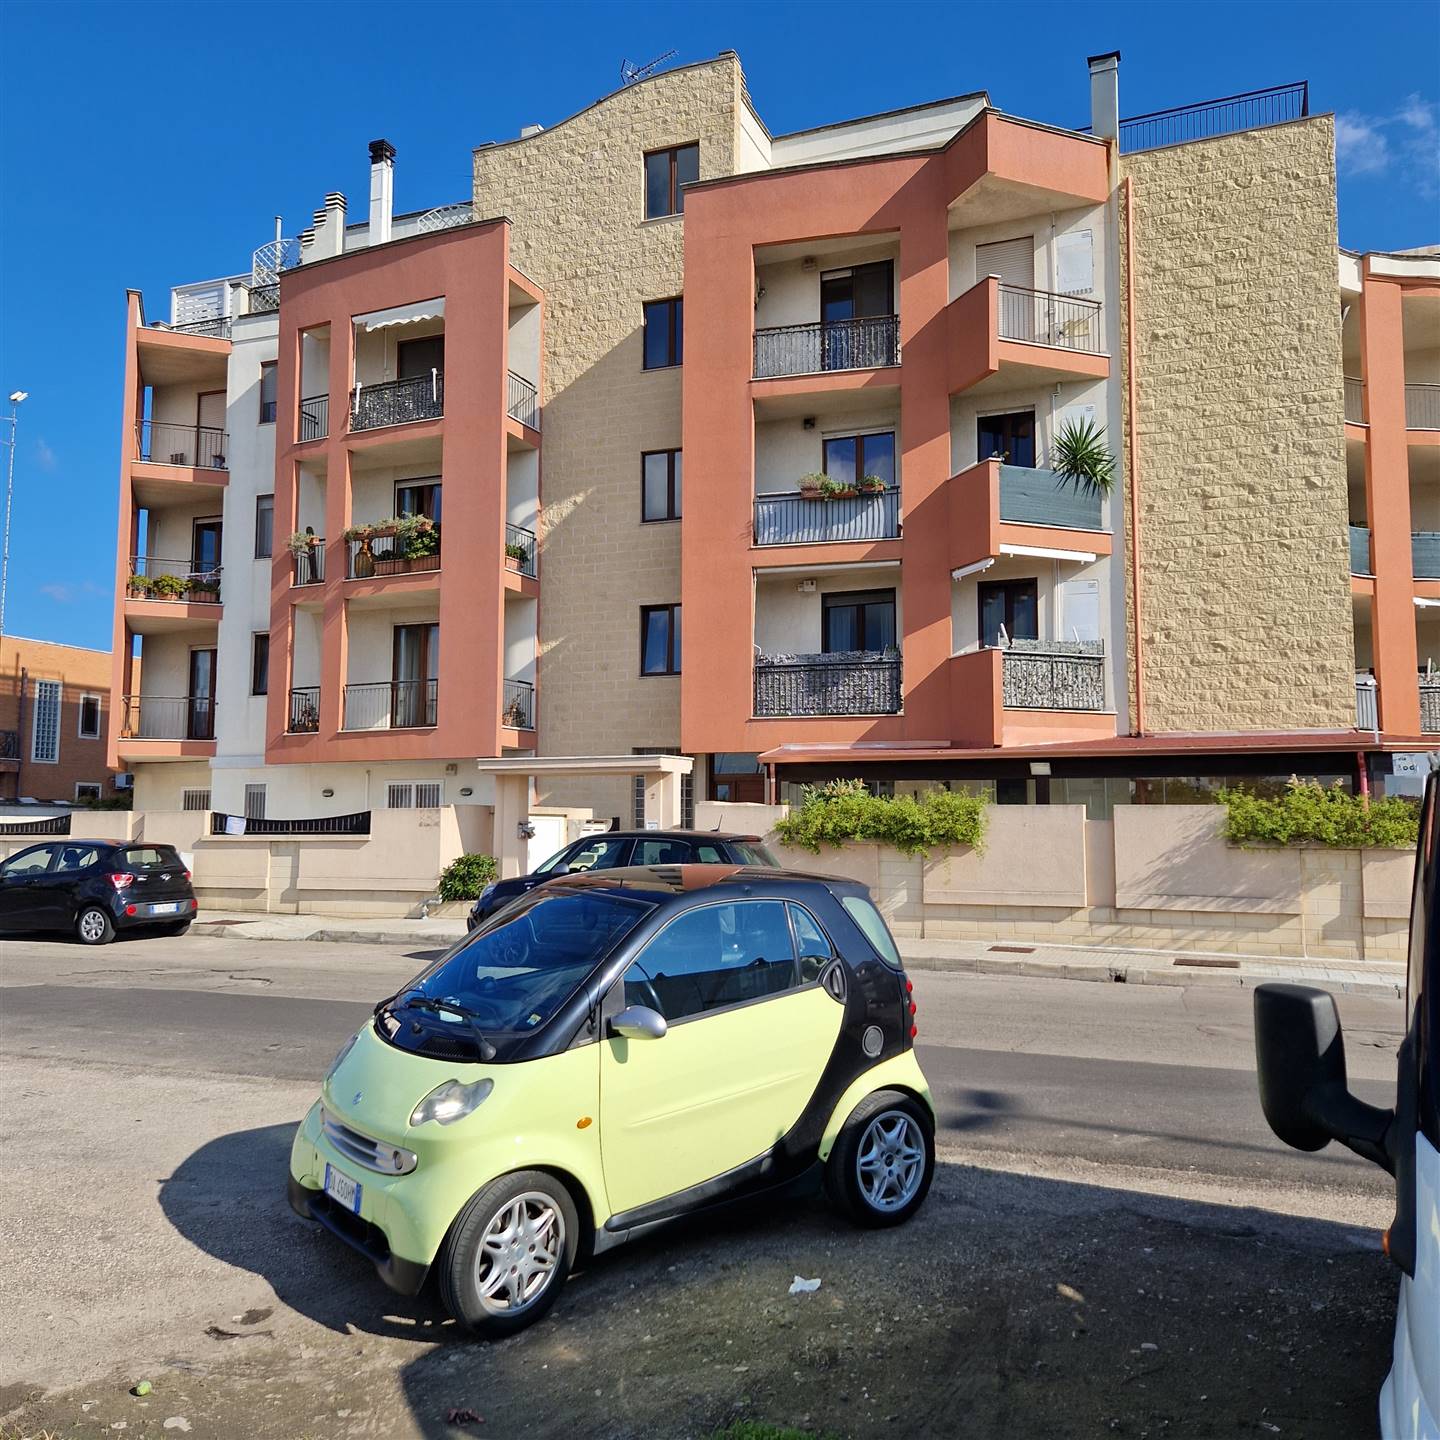 P. PARTIGIANI, LECCE, Apartment for sale of 120 Sq. mt., Habitable, Heating Individual heating system, Energetic class: E, placed at Ground, composed 